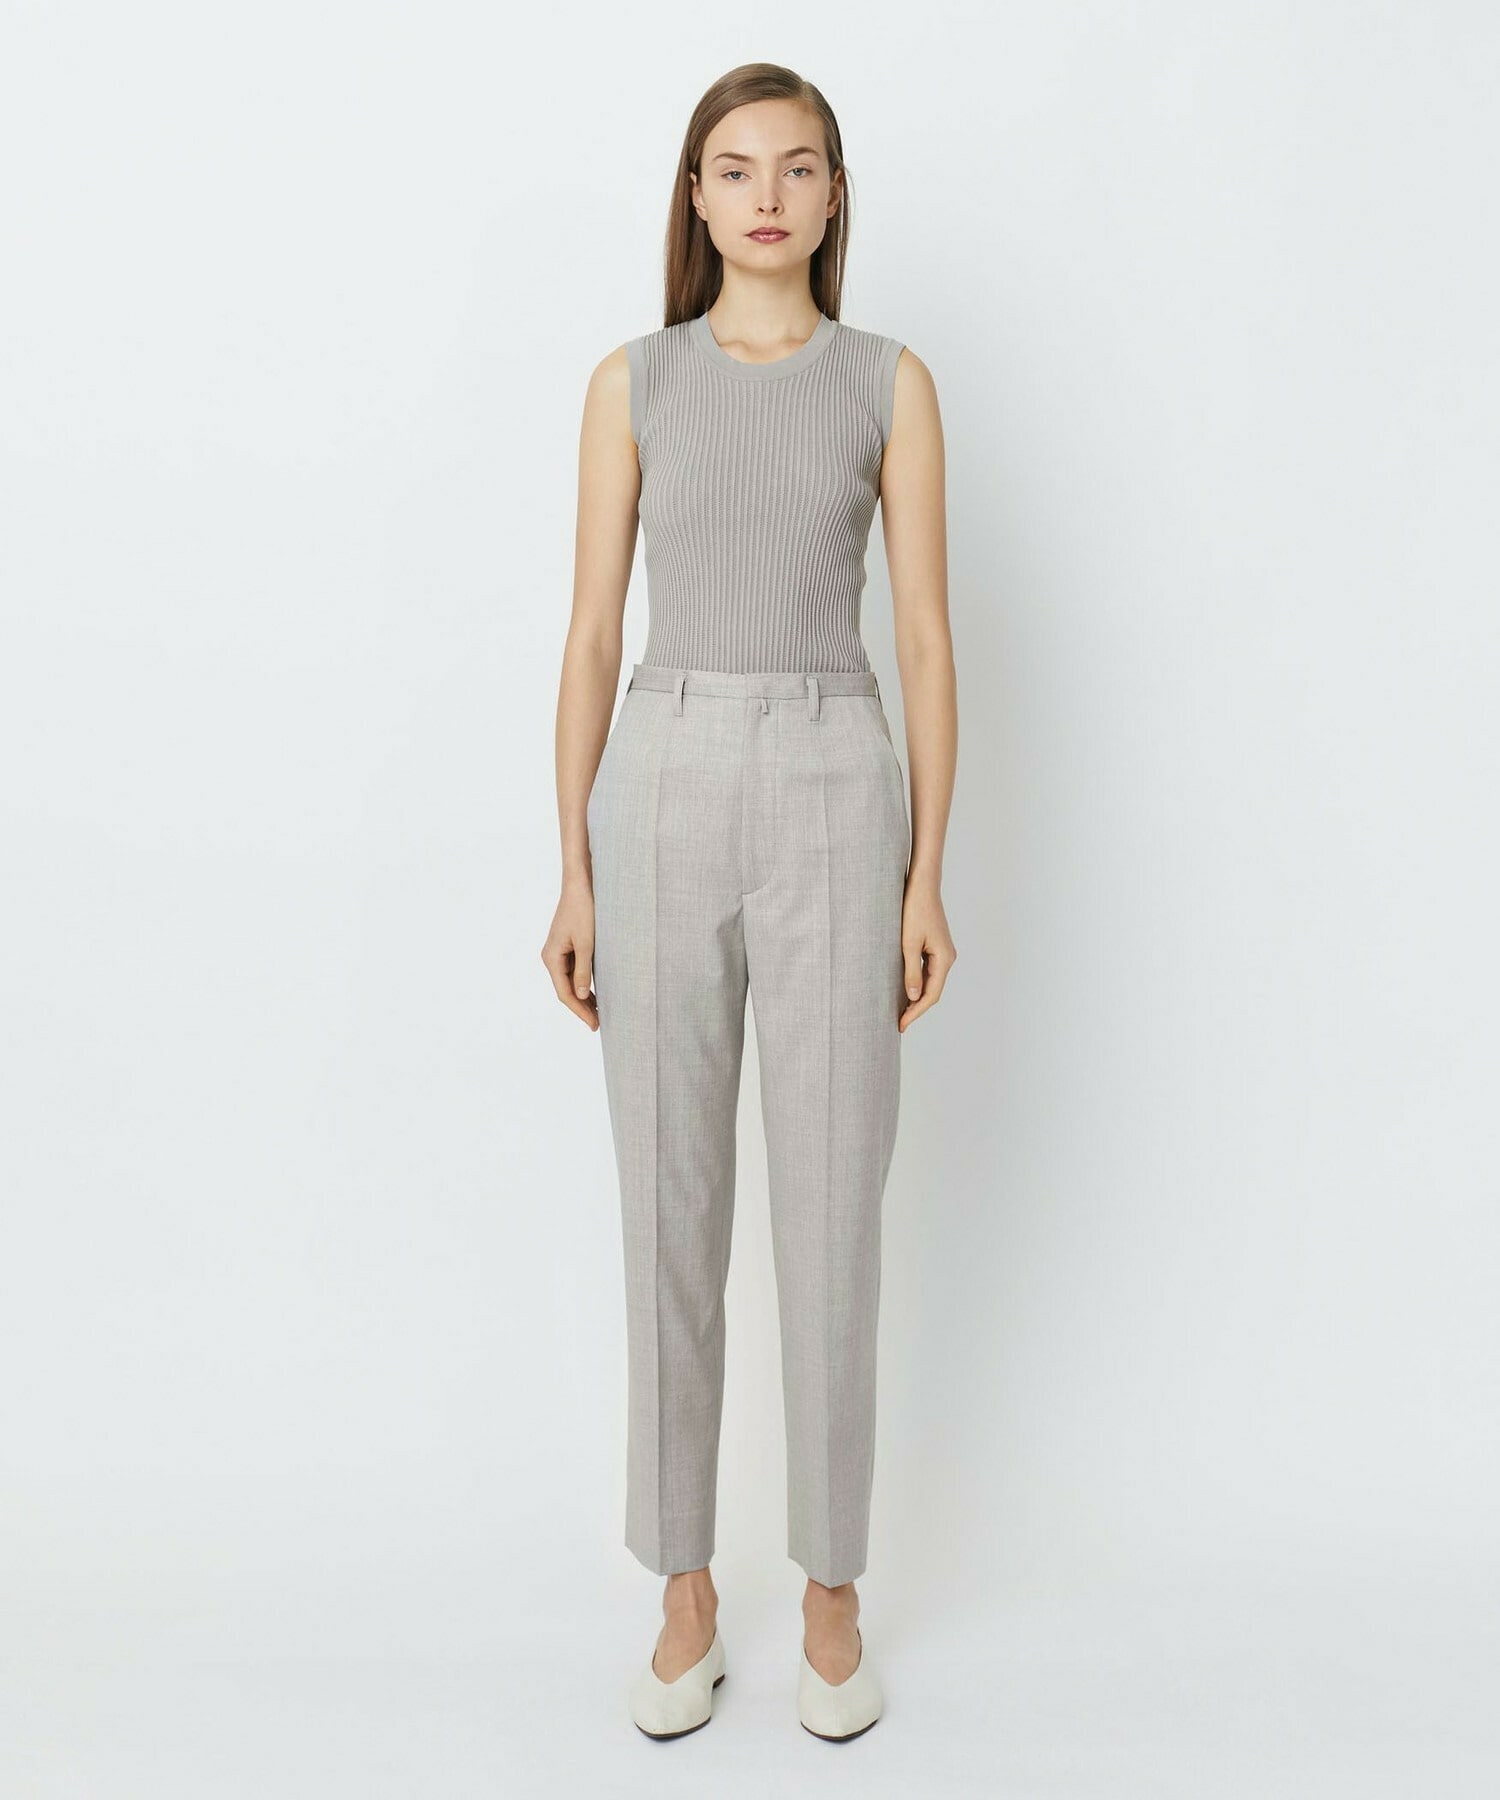 【yoshie inaba】STRETCH WOOL CIGARETTE PANTS 詳細画像 ライトグレー 5